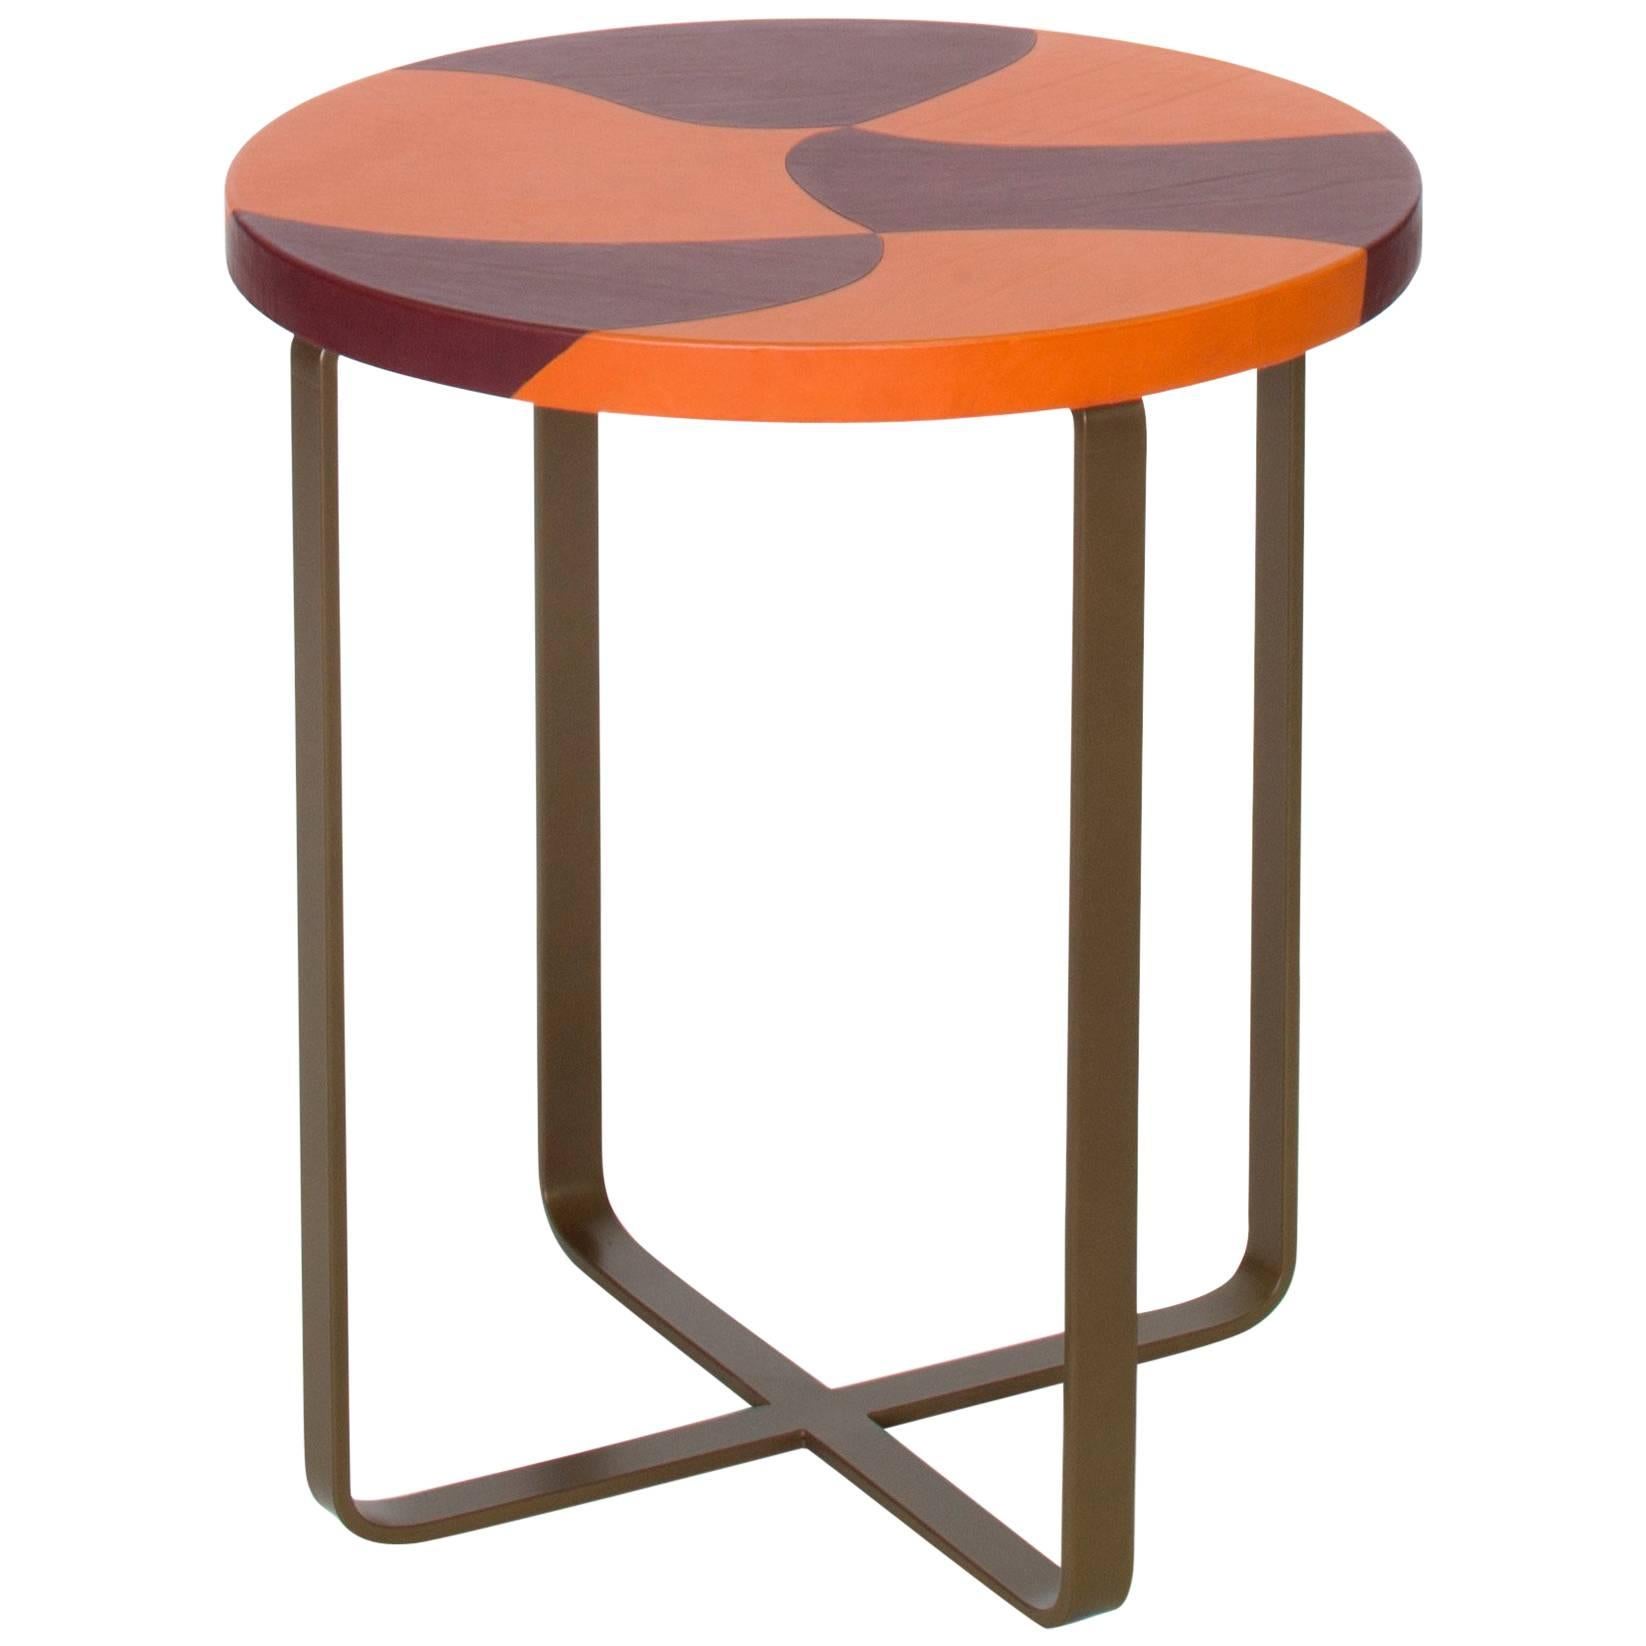 "Tiger" Inlaid Leather Top Side Table by Nestor Perkal for Oscar Maschera